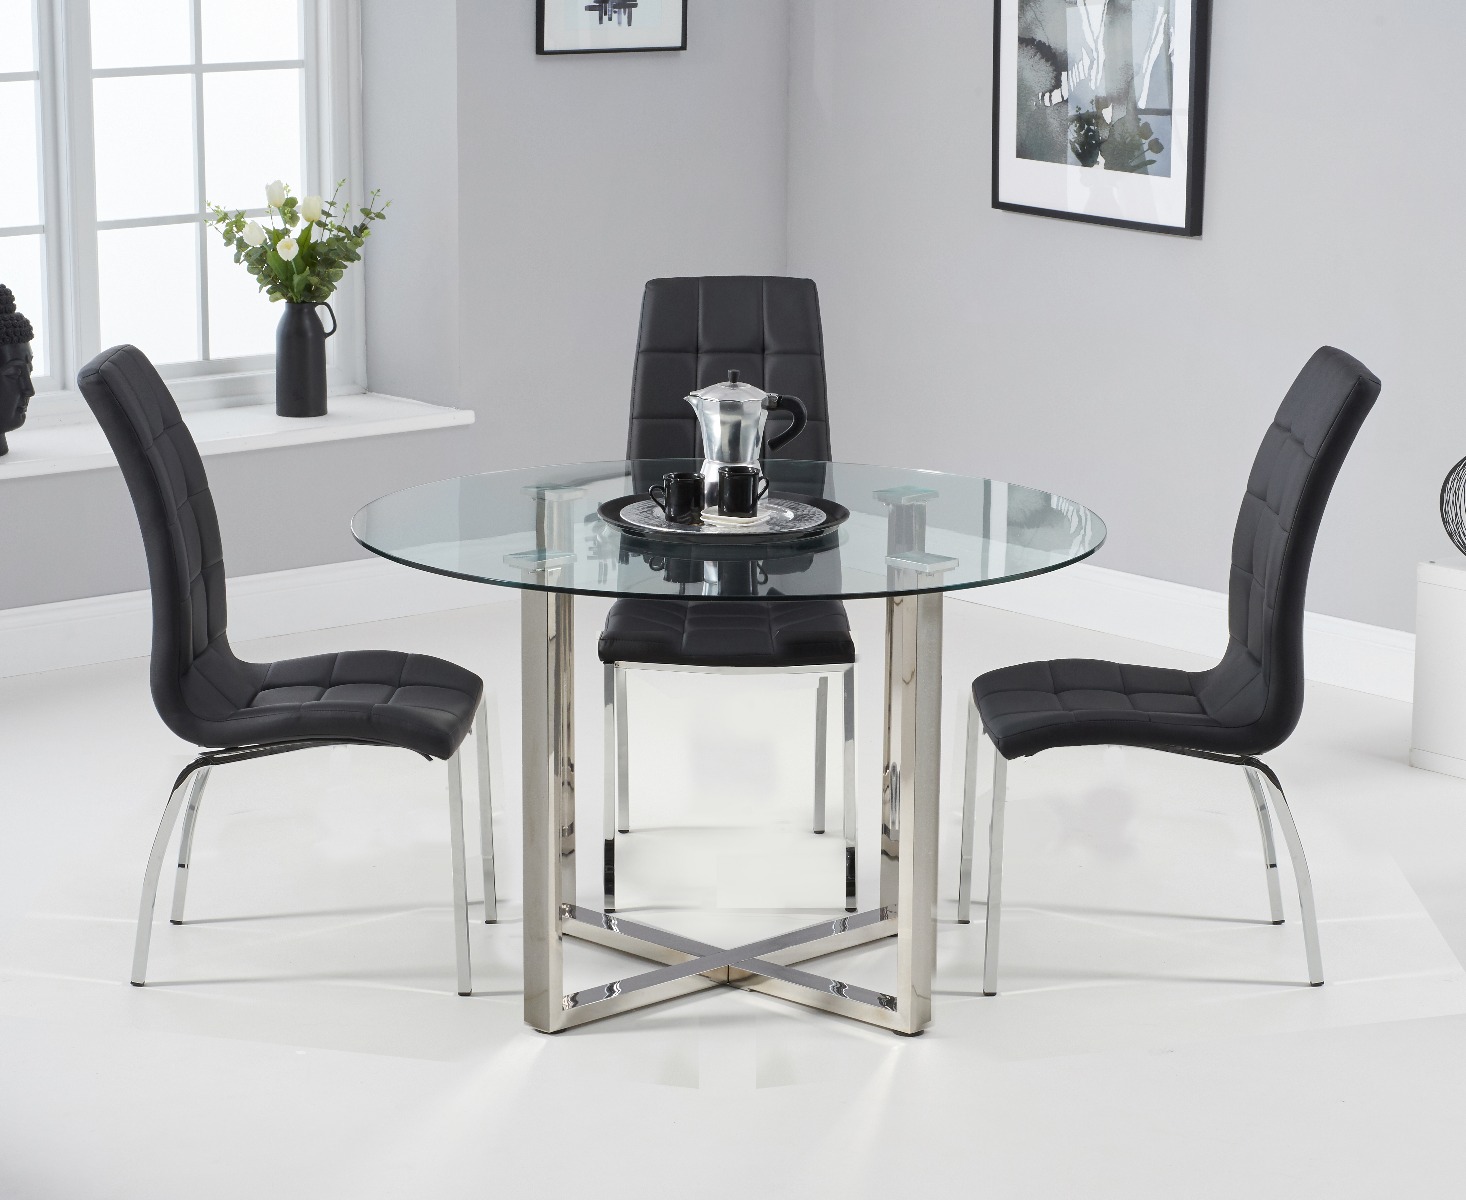 Photo 2 of Vaso 120cm round glass dining table with 4 grey enzo chairs